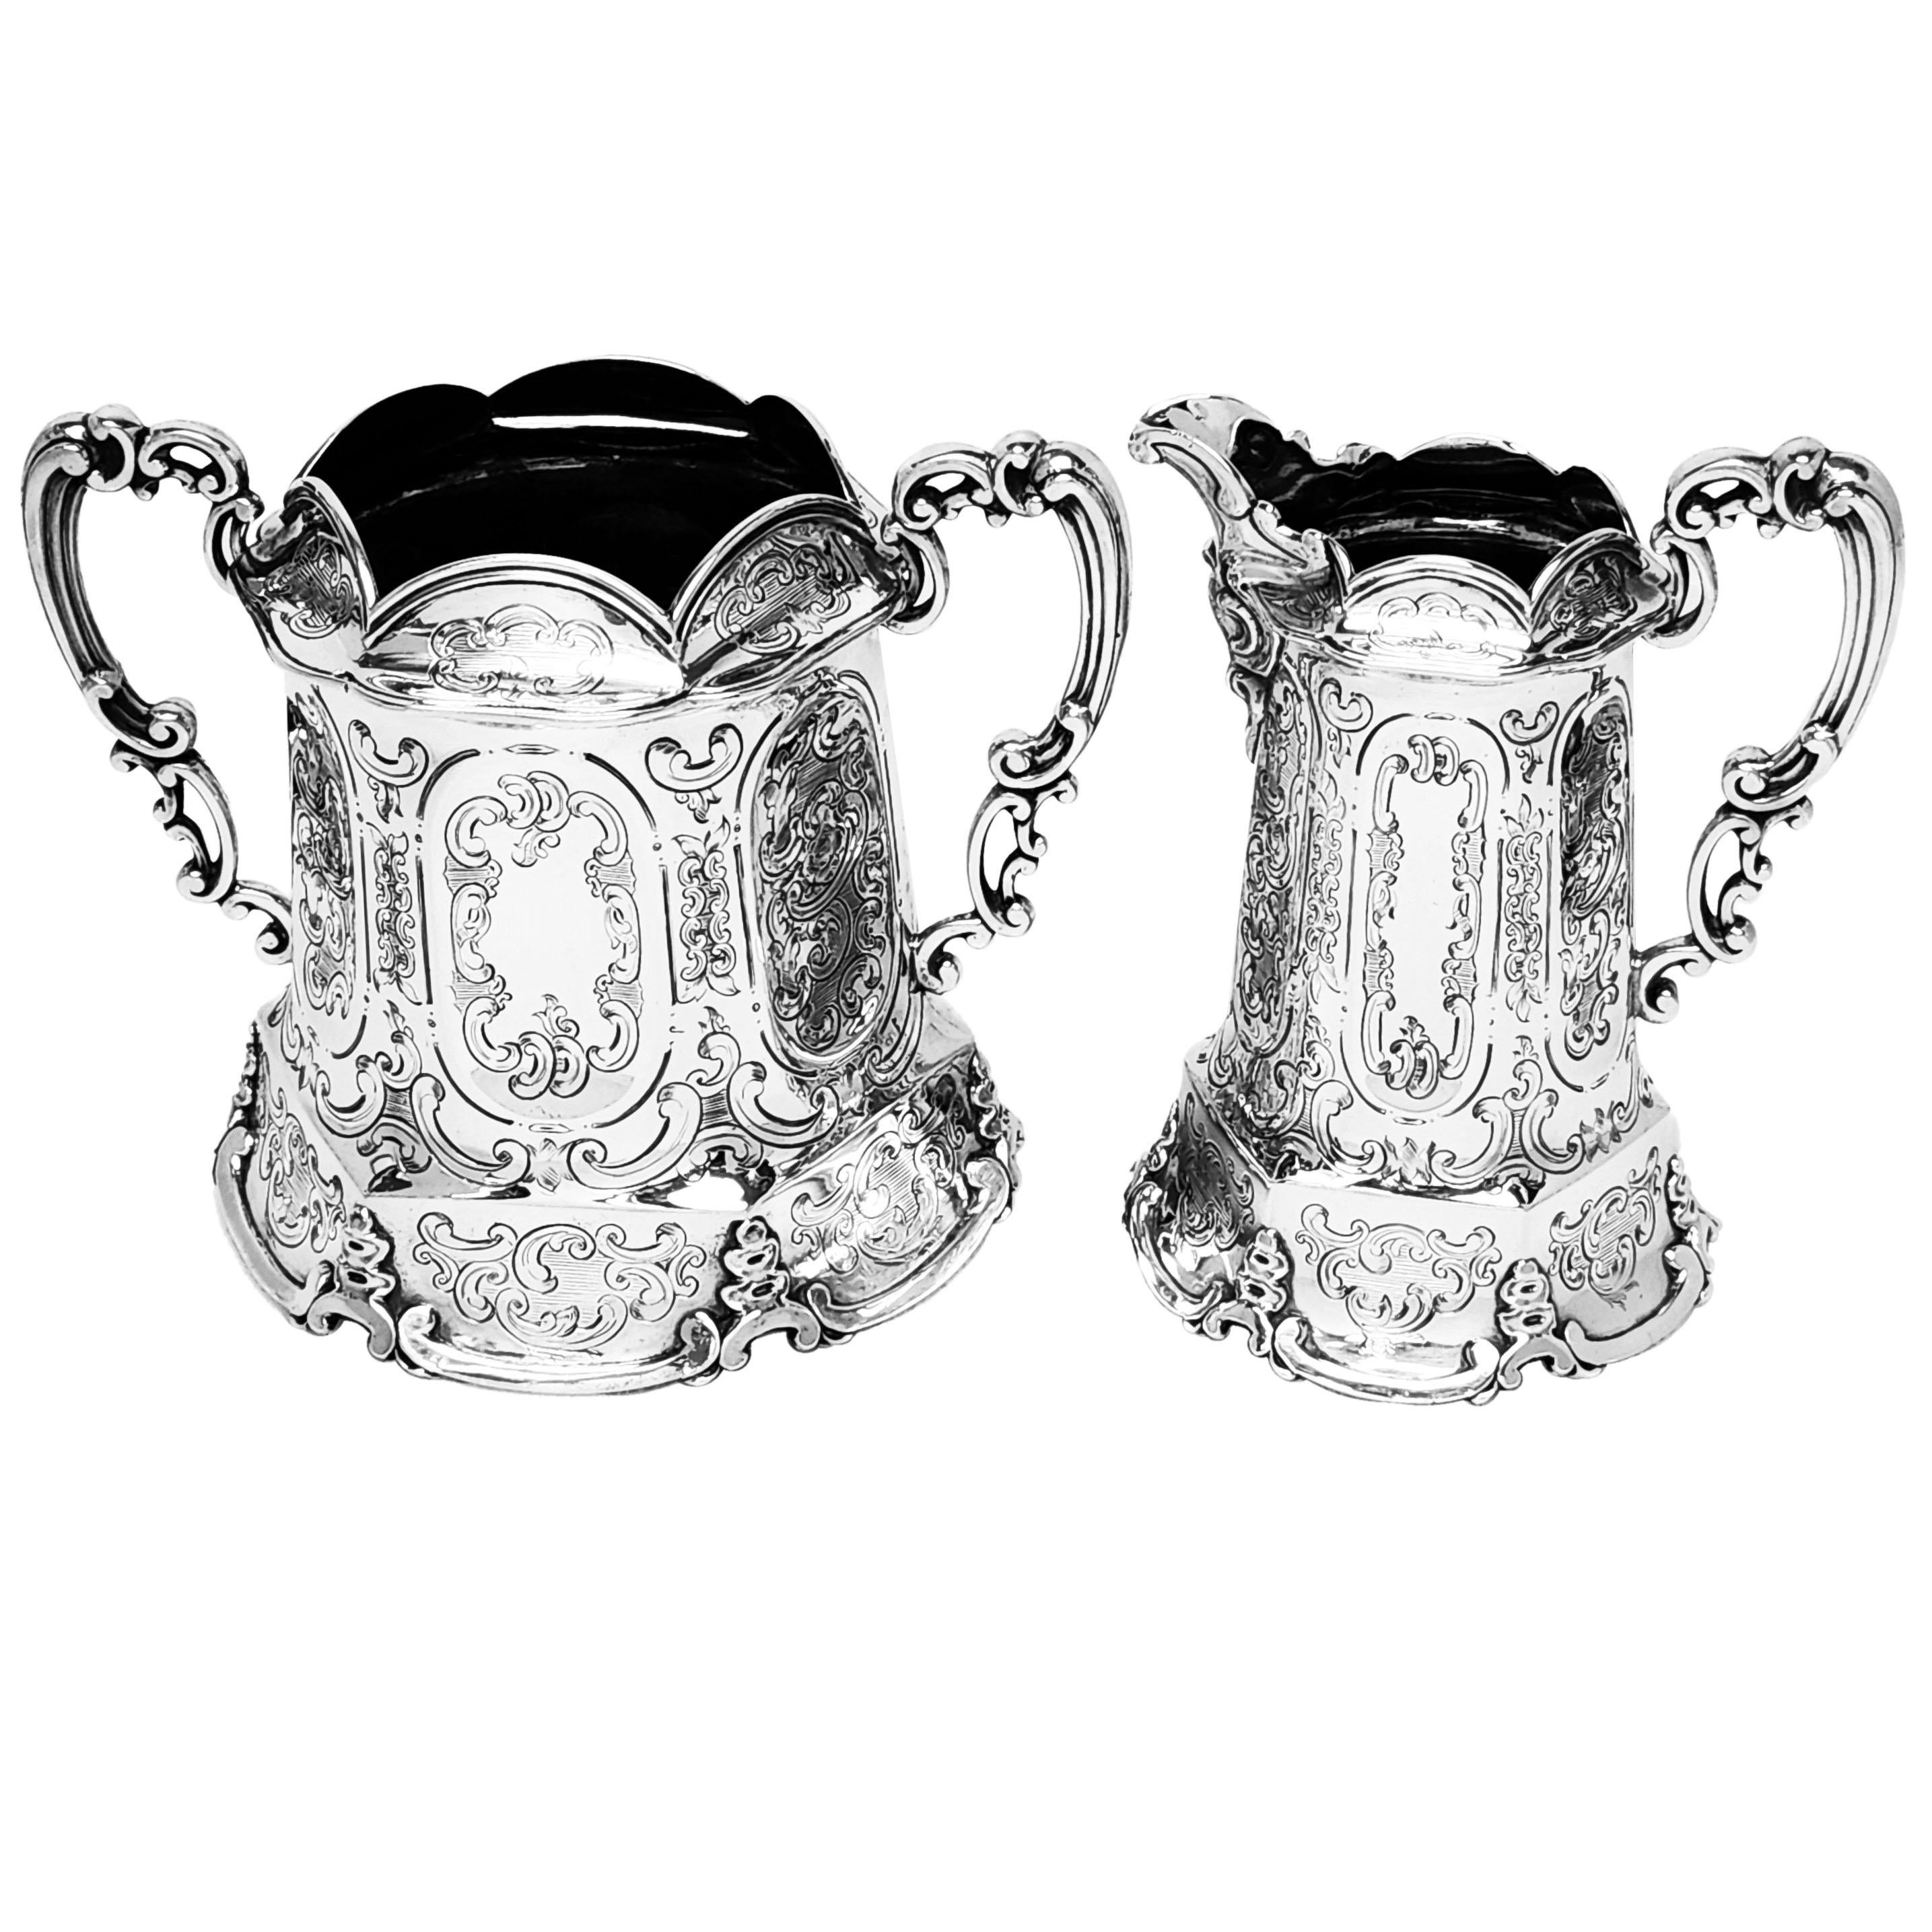 Antique Victorian 4 Piece Sterling Silver Tea & Coffee Set London England 1852 For Sale 2